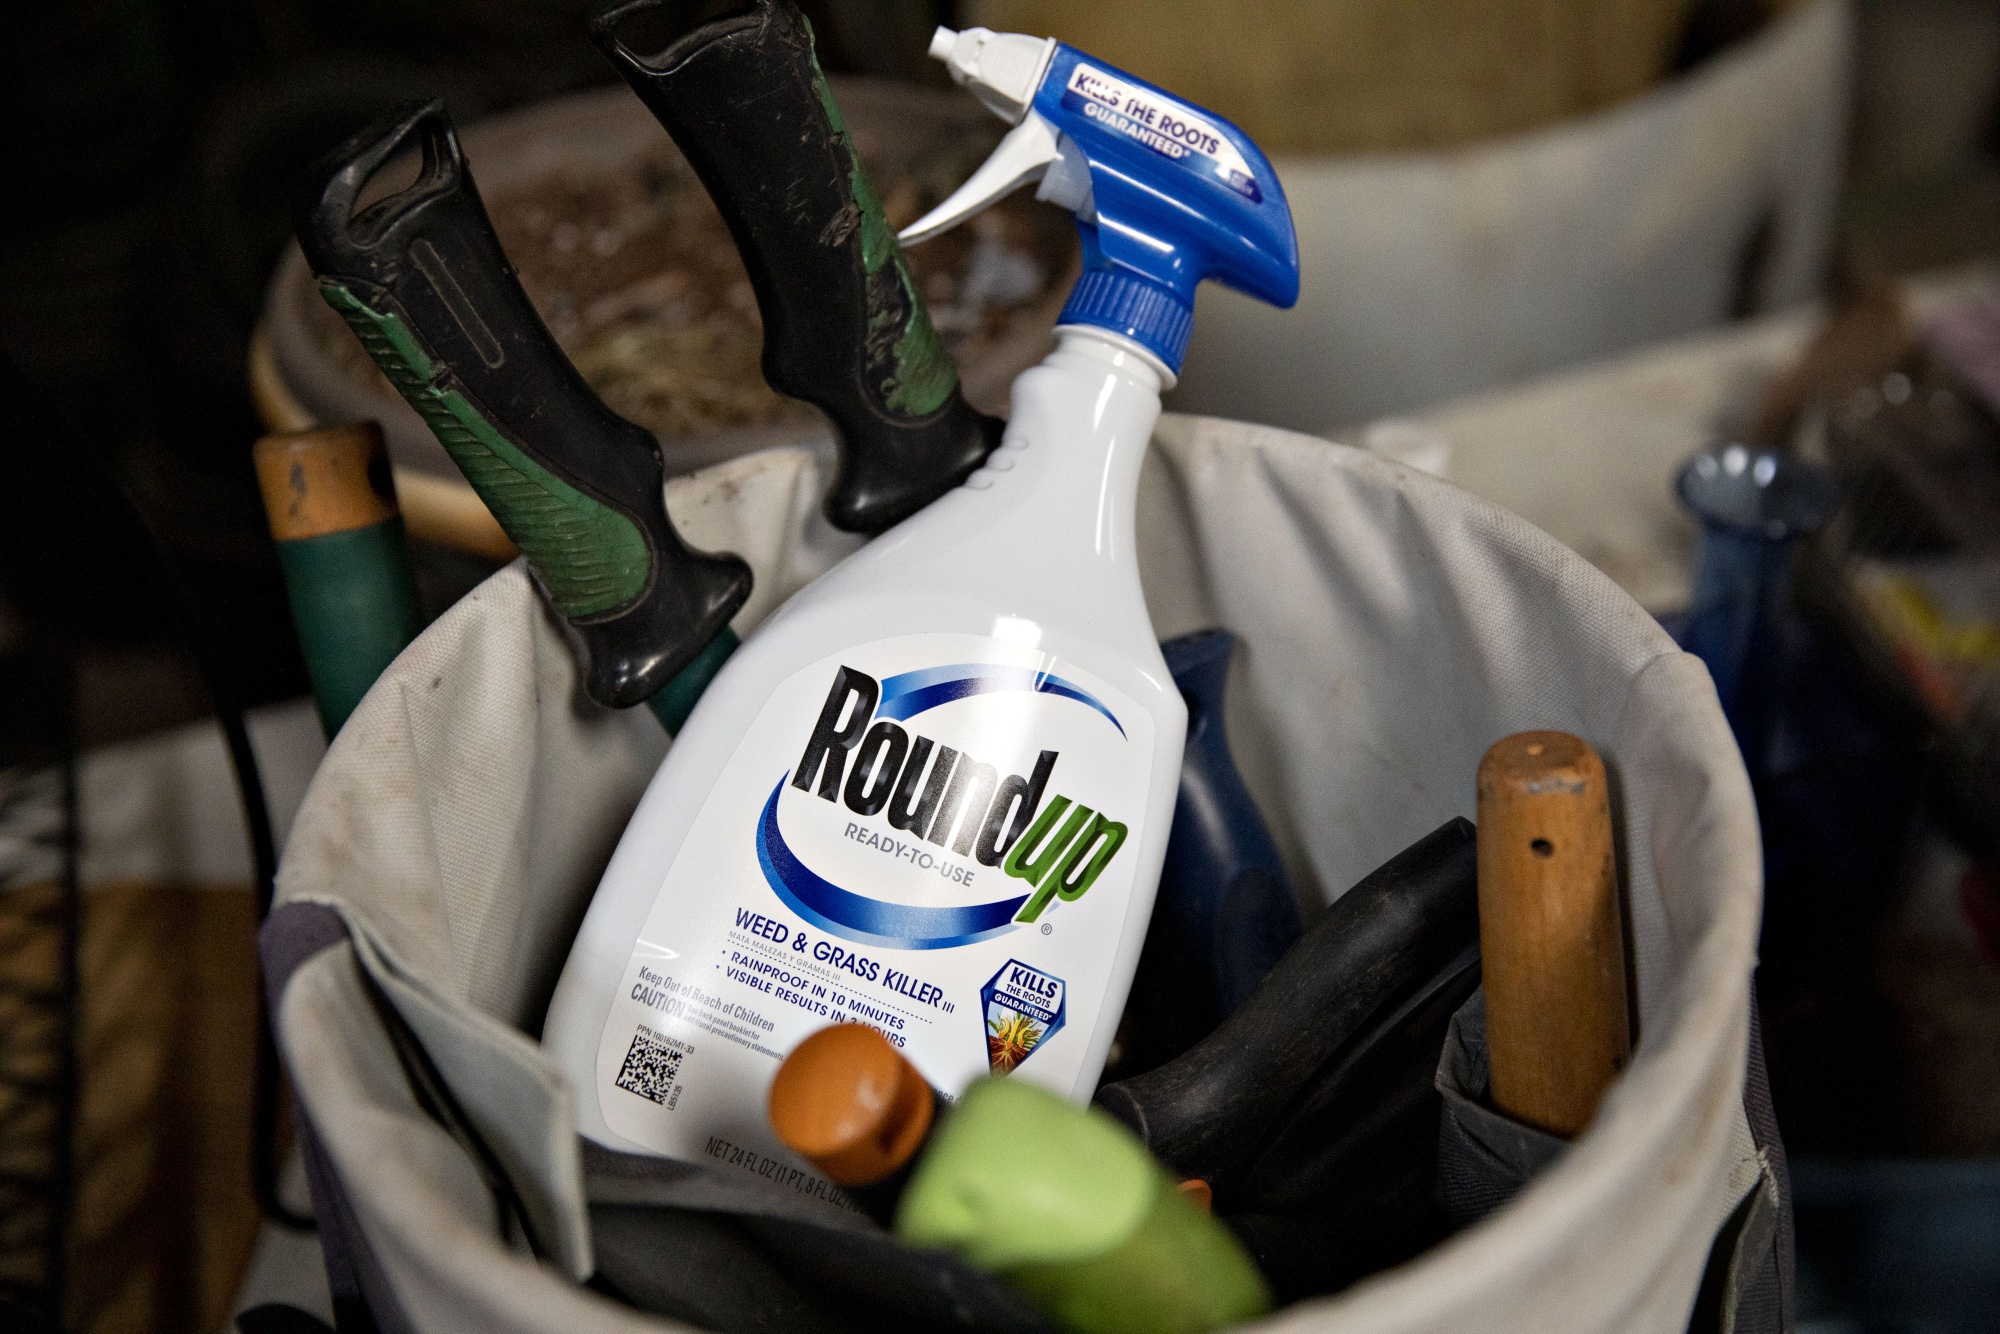 What to Know About Glyphosate, the Pesticide in Roundup Weed Killer